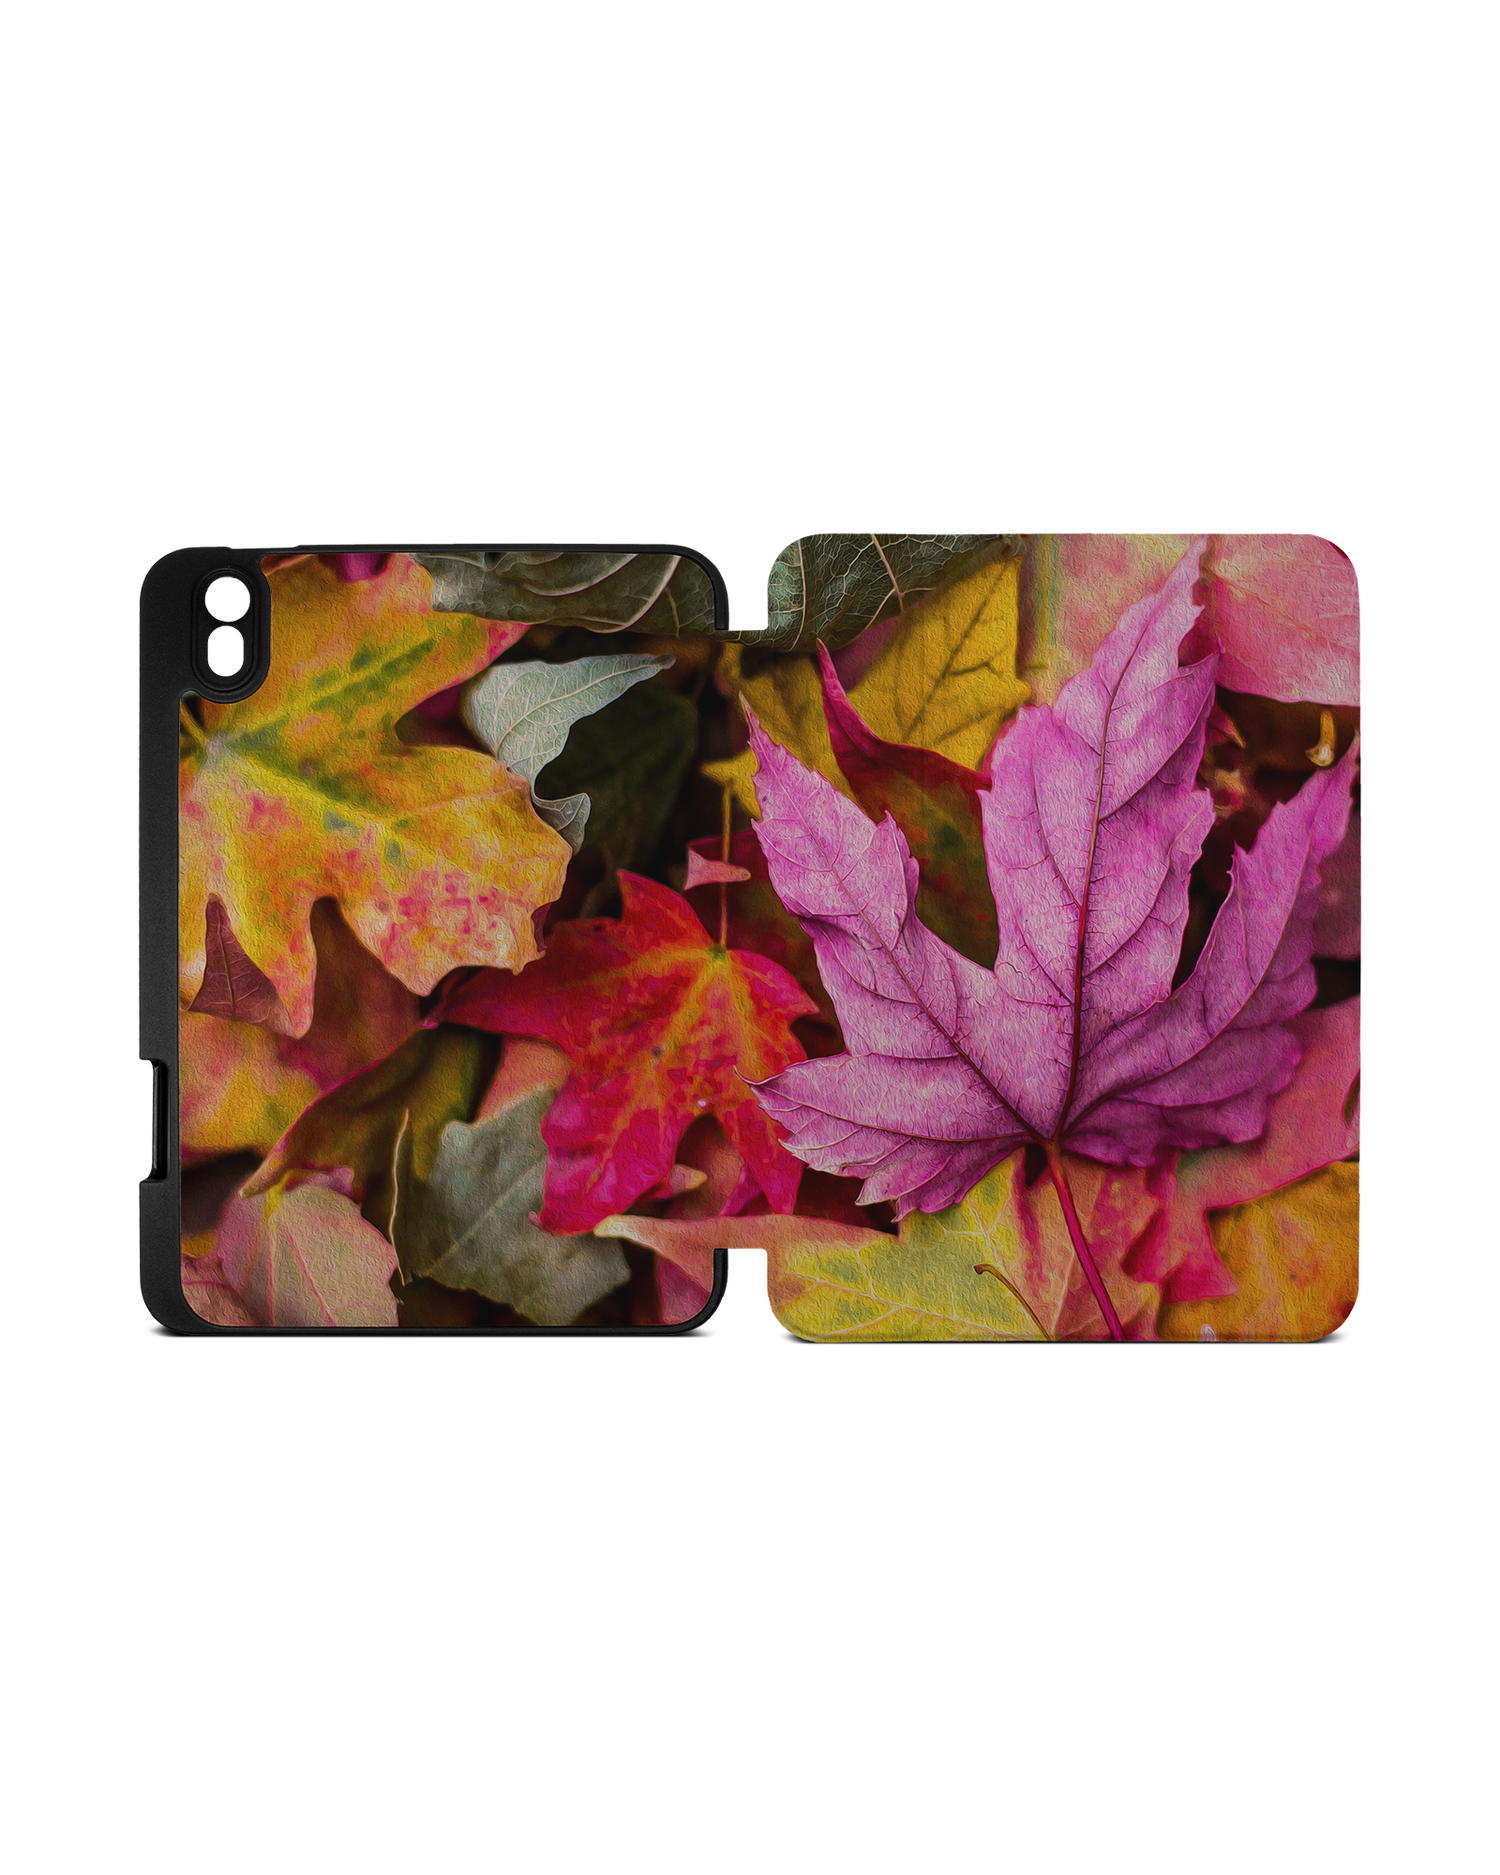 Autumn Leaves iPad Case with Pencil Holder Apple iPad mini 6 (2021): Opened exterior view